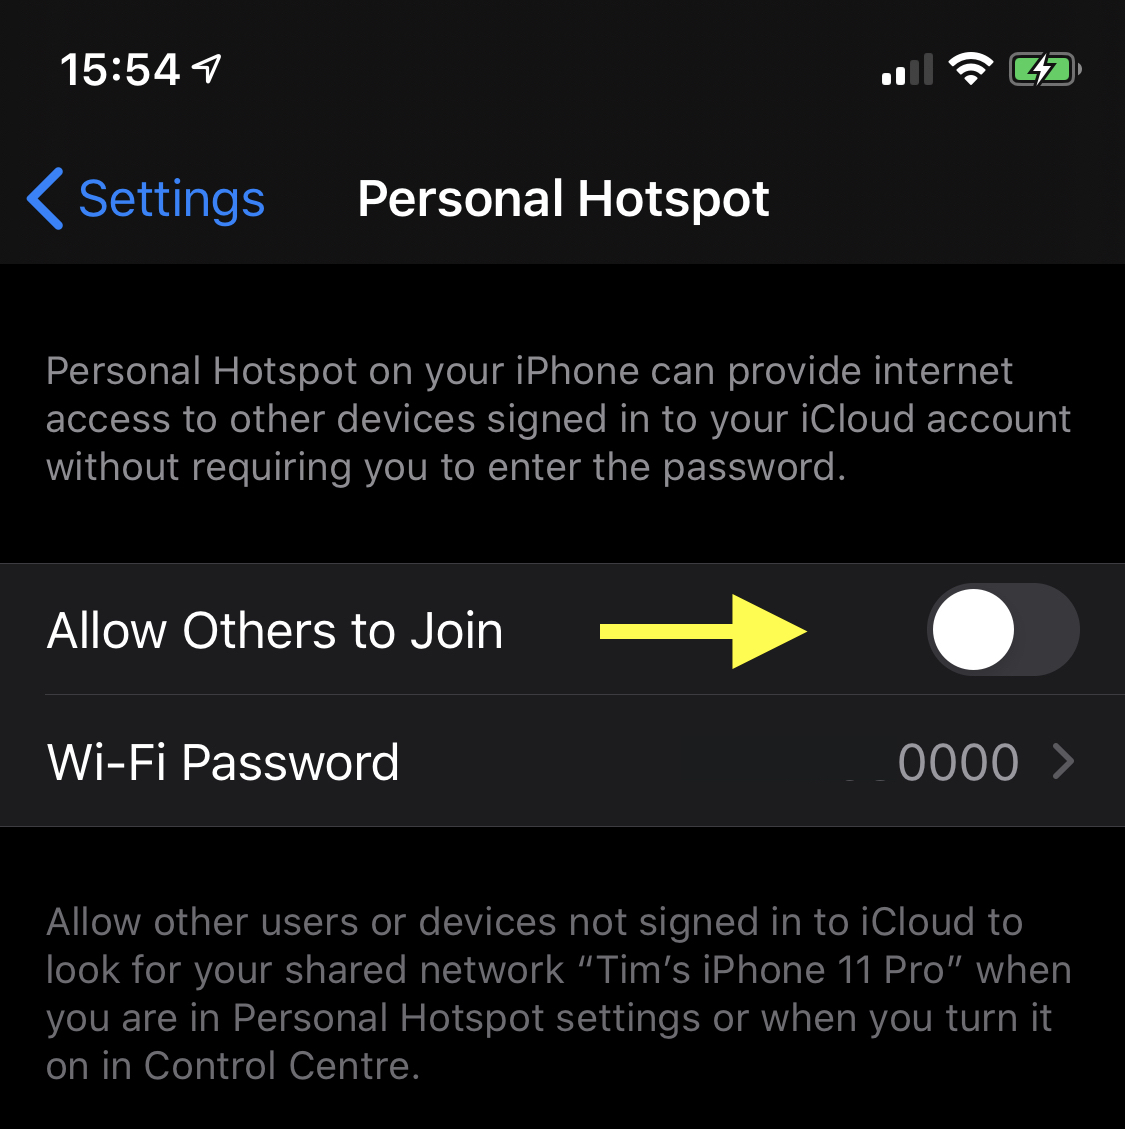 allow-others-to-join-hotspot.jpeg